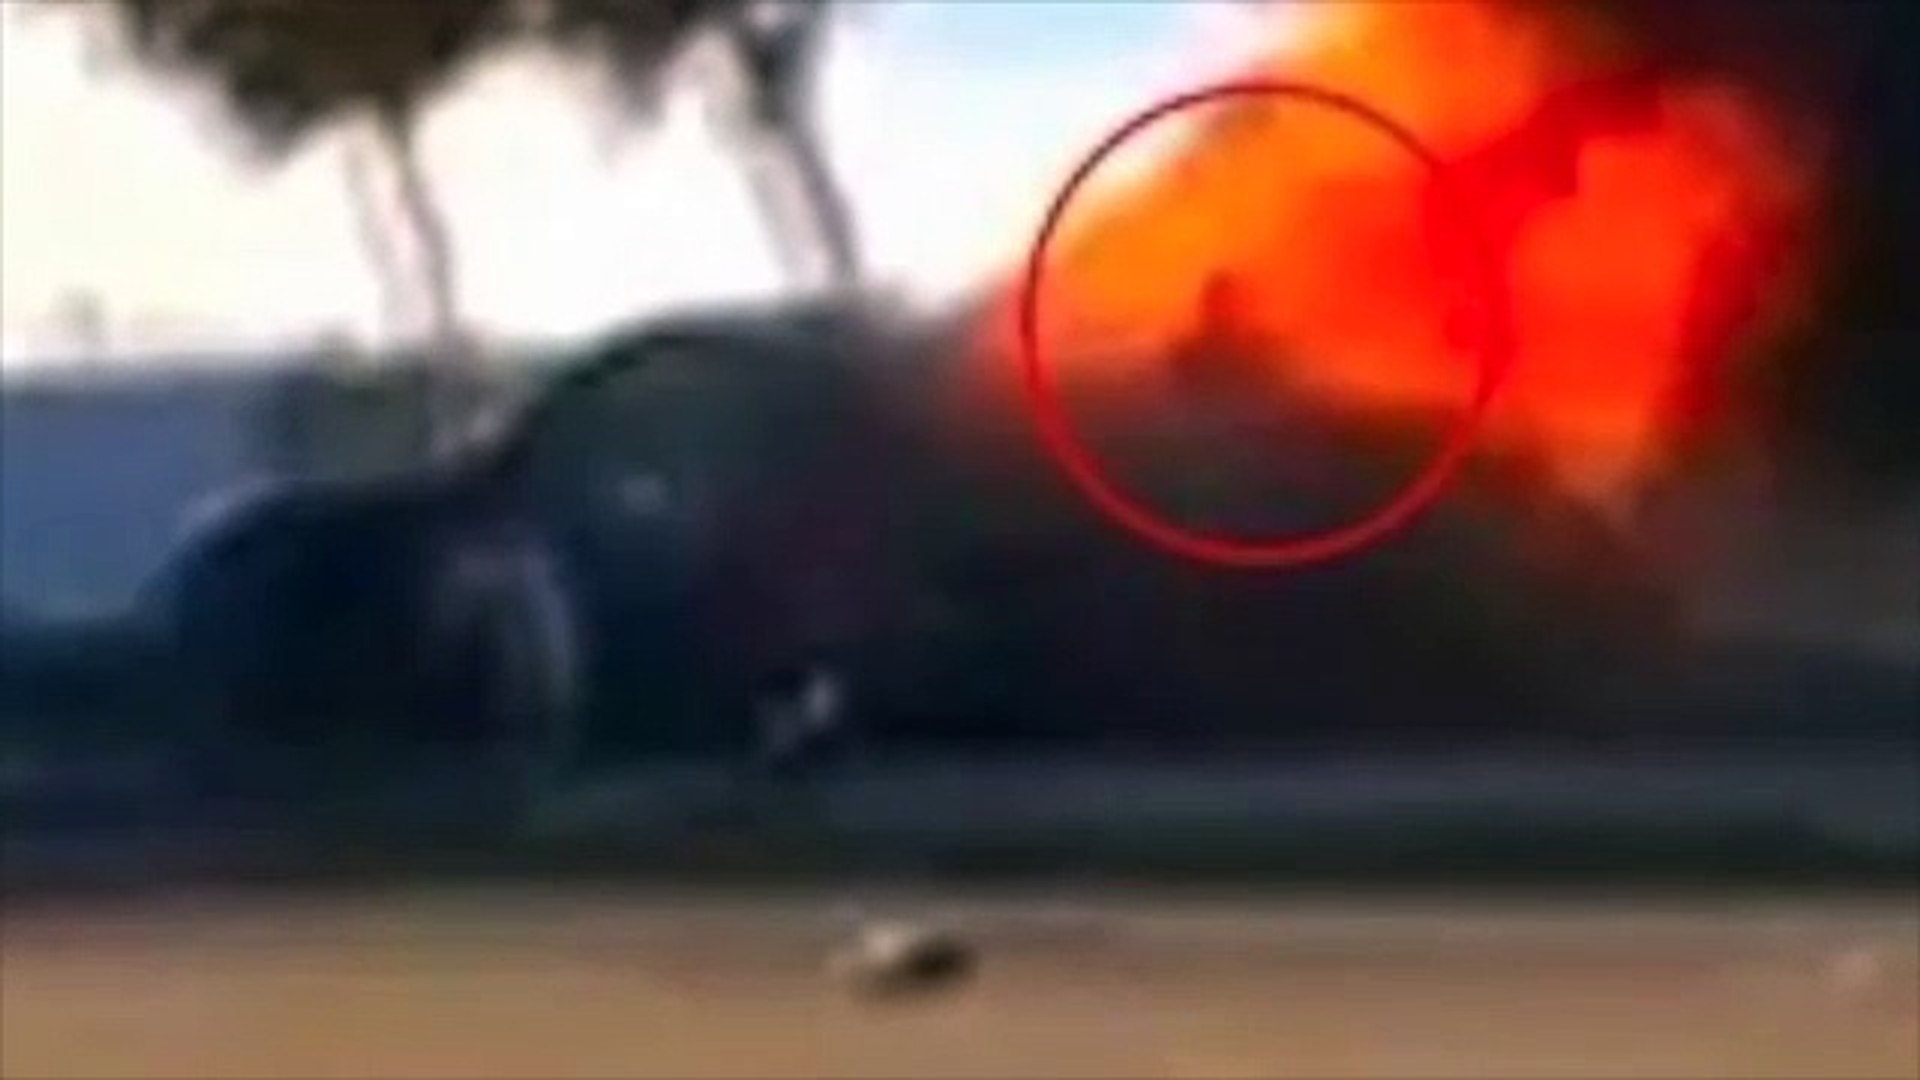 PAUL WALKER ACCIDENTE / Real ghost caught on tape - Dailymotion Video